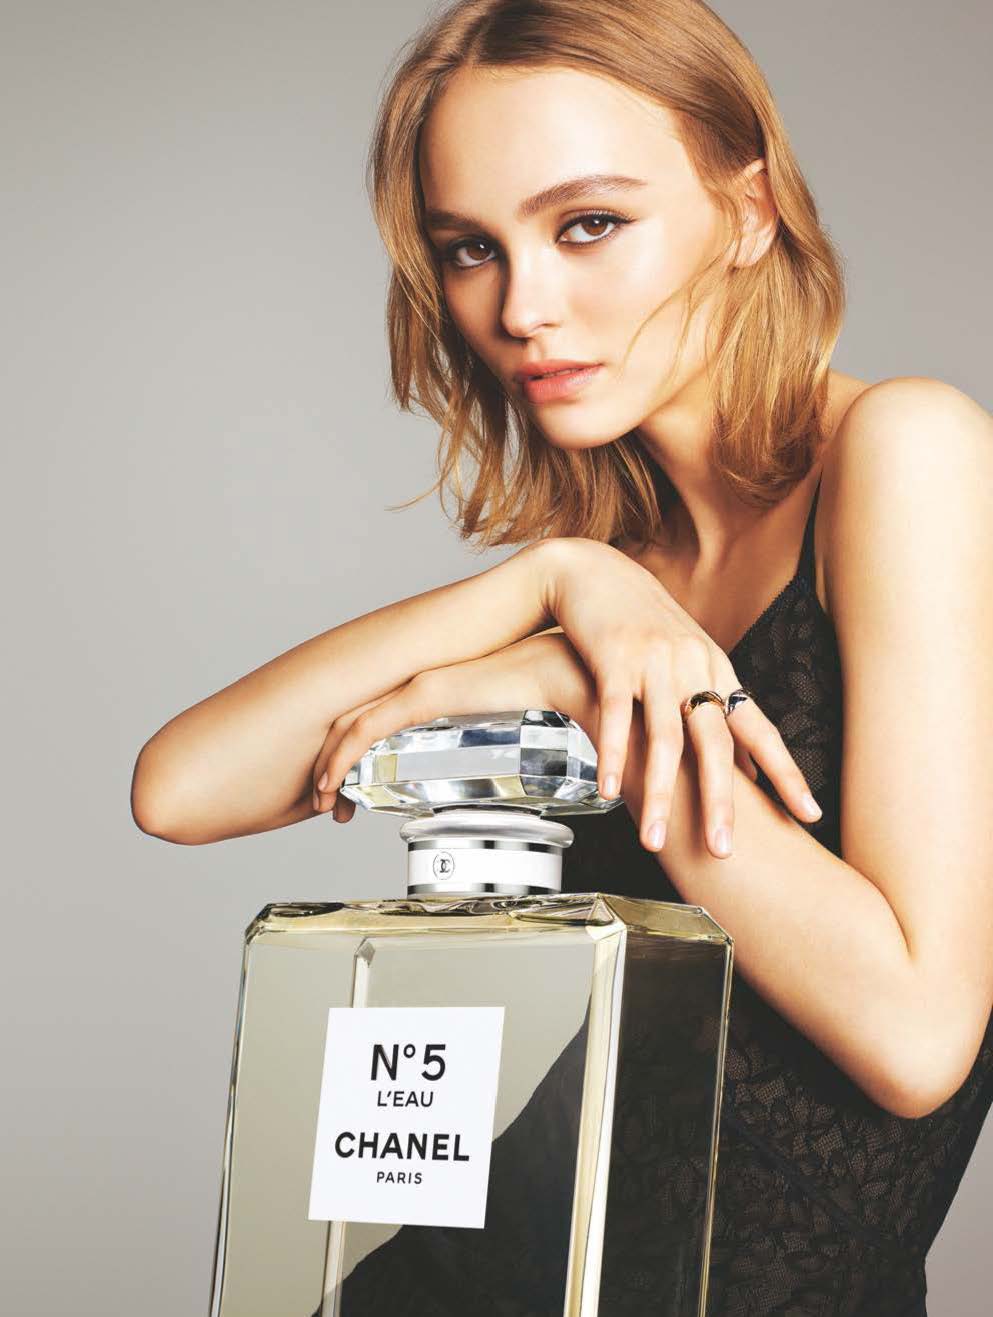 Chanel's No. 5 L'eau Fragrance Campaign with Lily Rose Depp